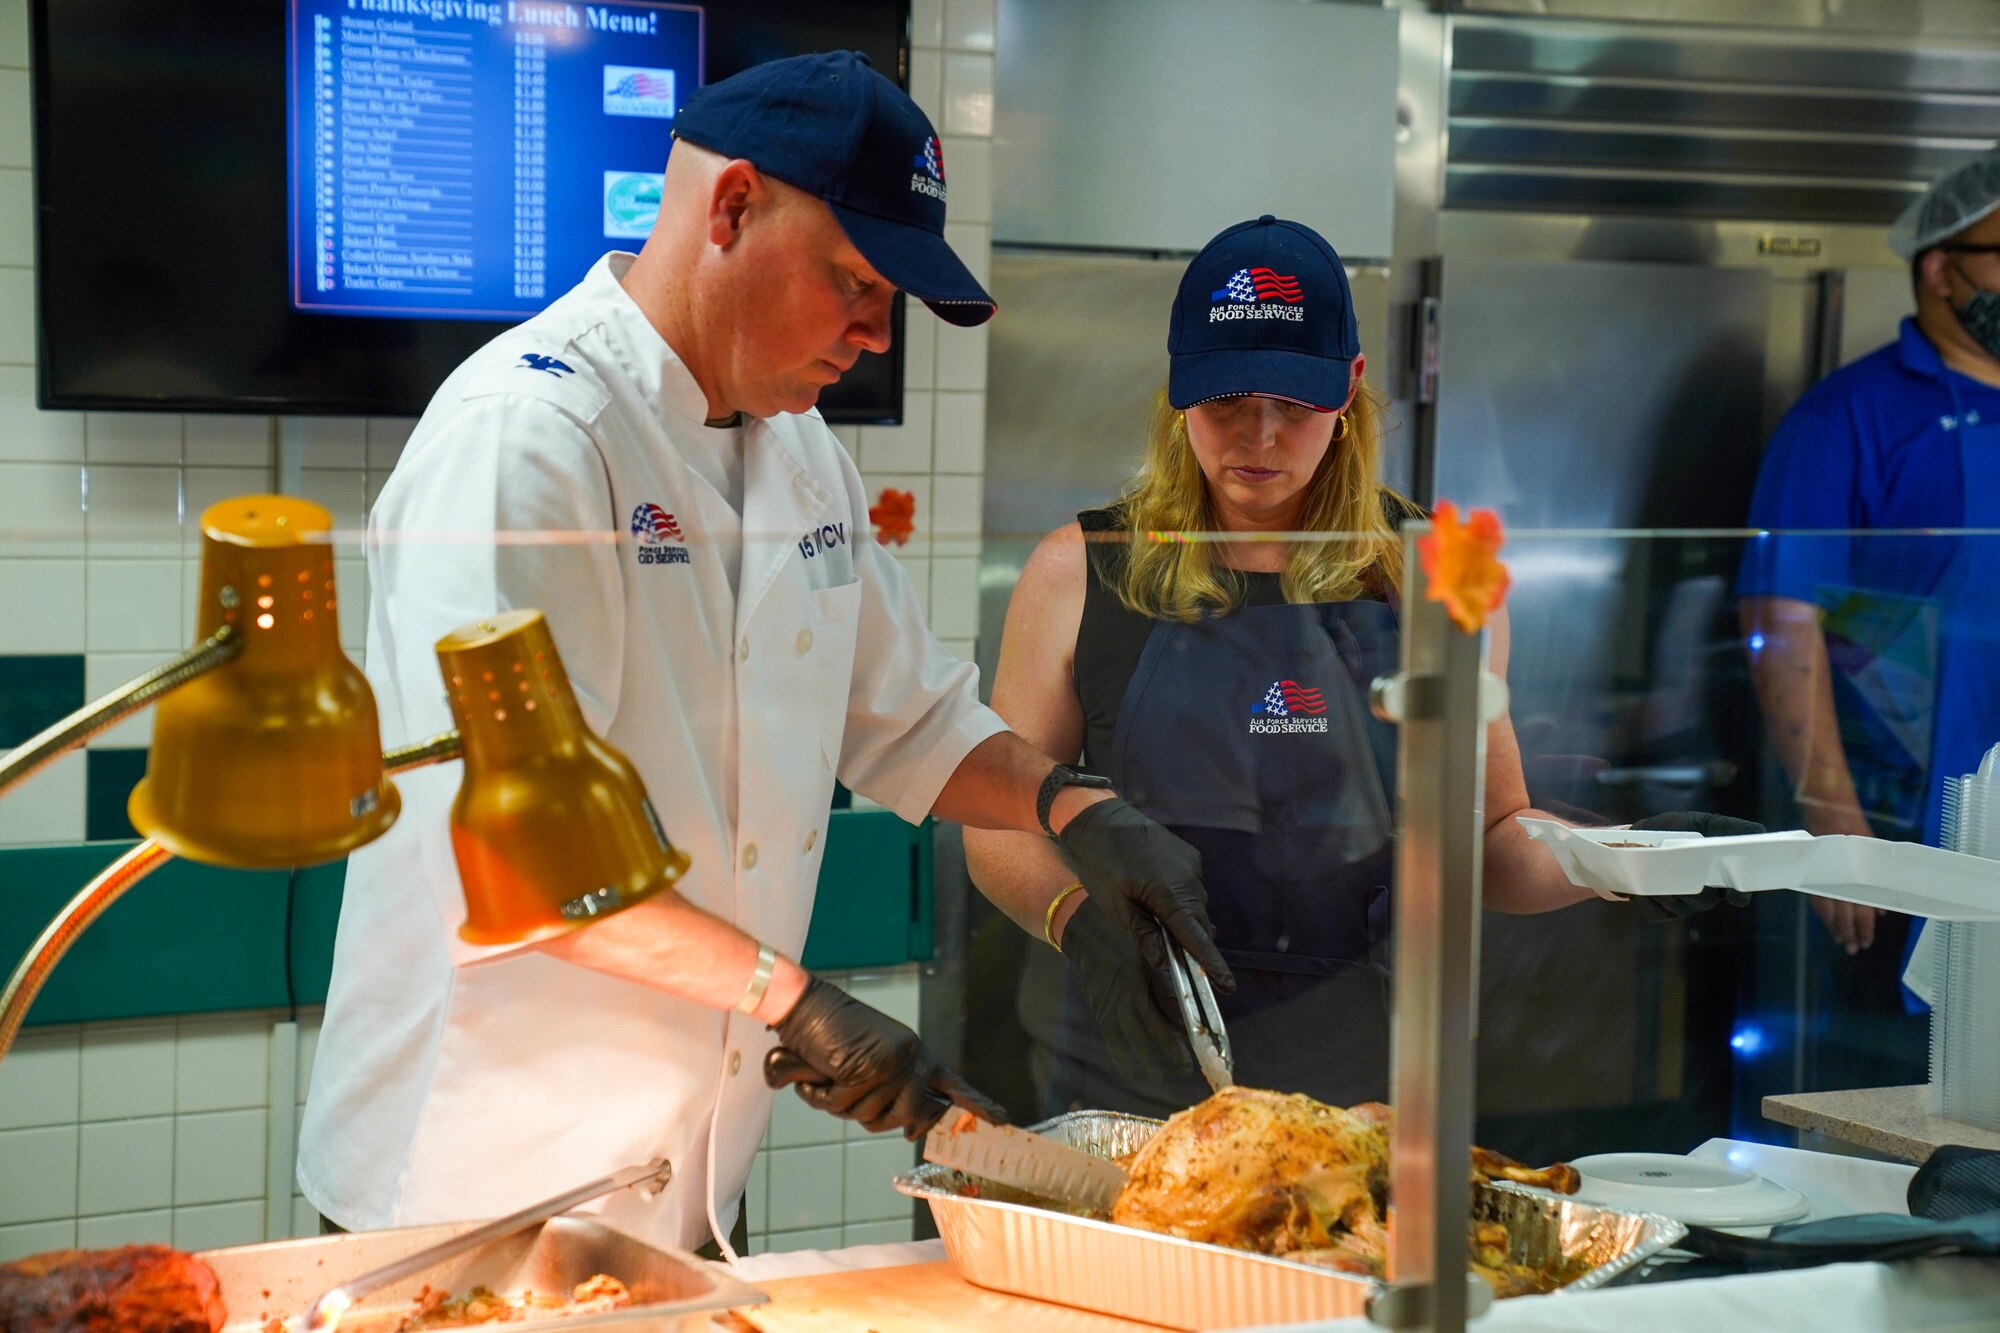 Col. Robert Brown, 15th Wing vice commander and his wife Jane Brown carve the turkey at the Hale Aina Dining Facility, November 25, 2021. Leaders from Joint Base Pearl Harbor-Hickam served airmen and their families lunch on Thanksgiving. (U.S. Air Force photo by Airman 1st Class Makensie Cooper)